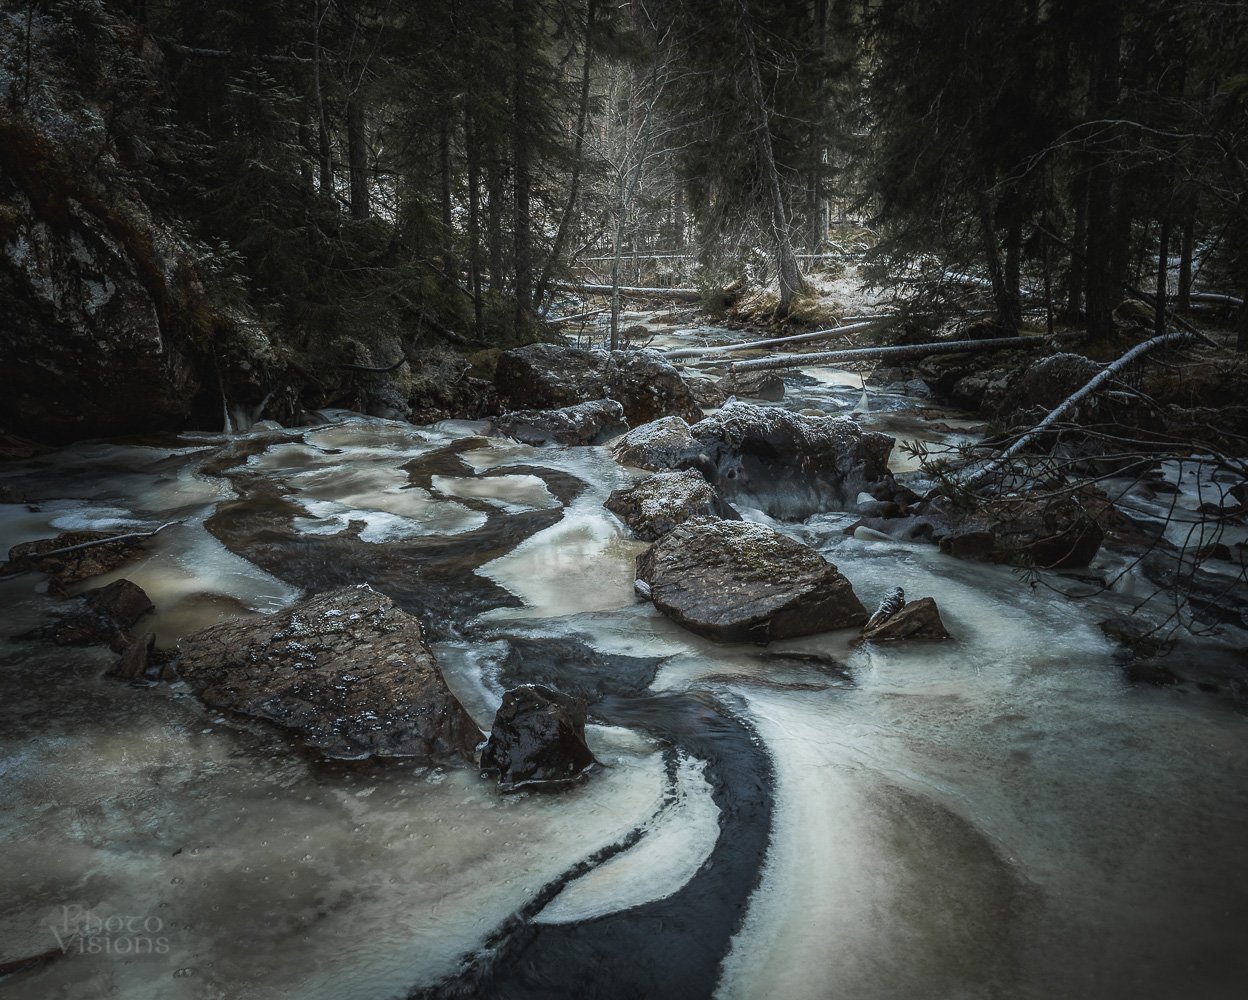 norway,nature,forest,boreal,woods,woodland,river,stream,mountains,trees,wintertime,norwegian,scandinavia, Adrian Szatewicz